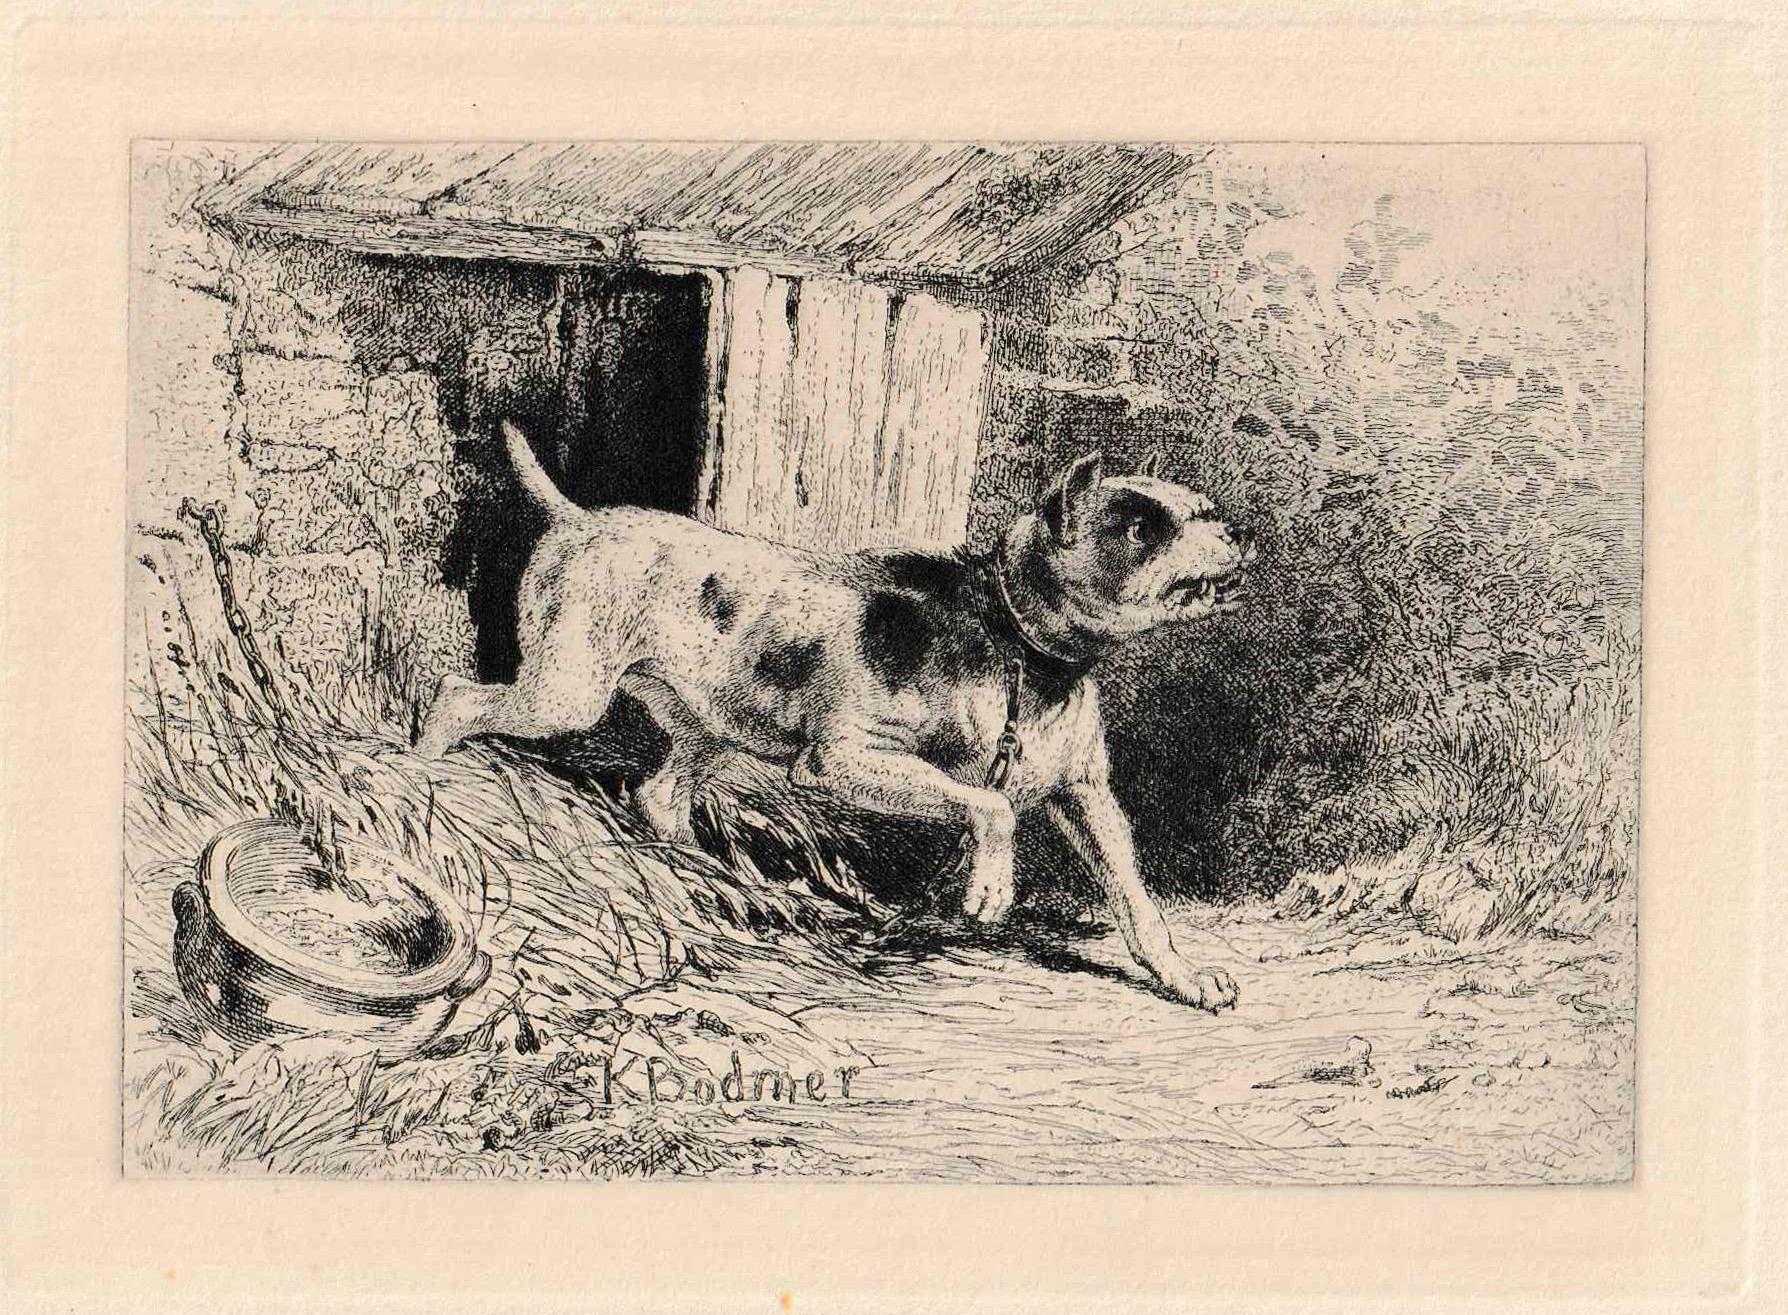 Karl Bodmer Figurative Print - Watchdog, from Eaux-Fortes Animaux & Paysages